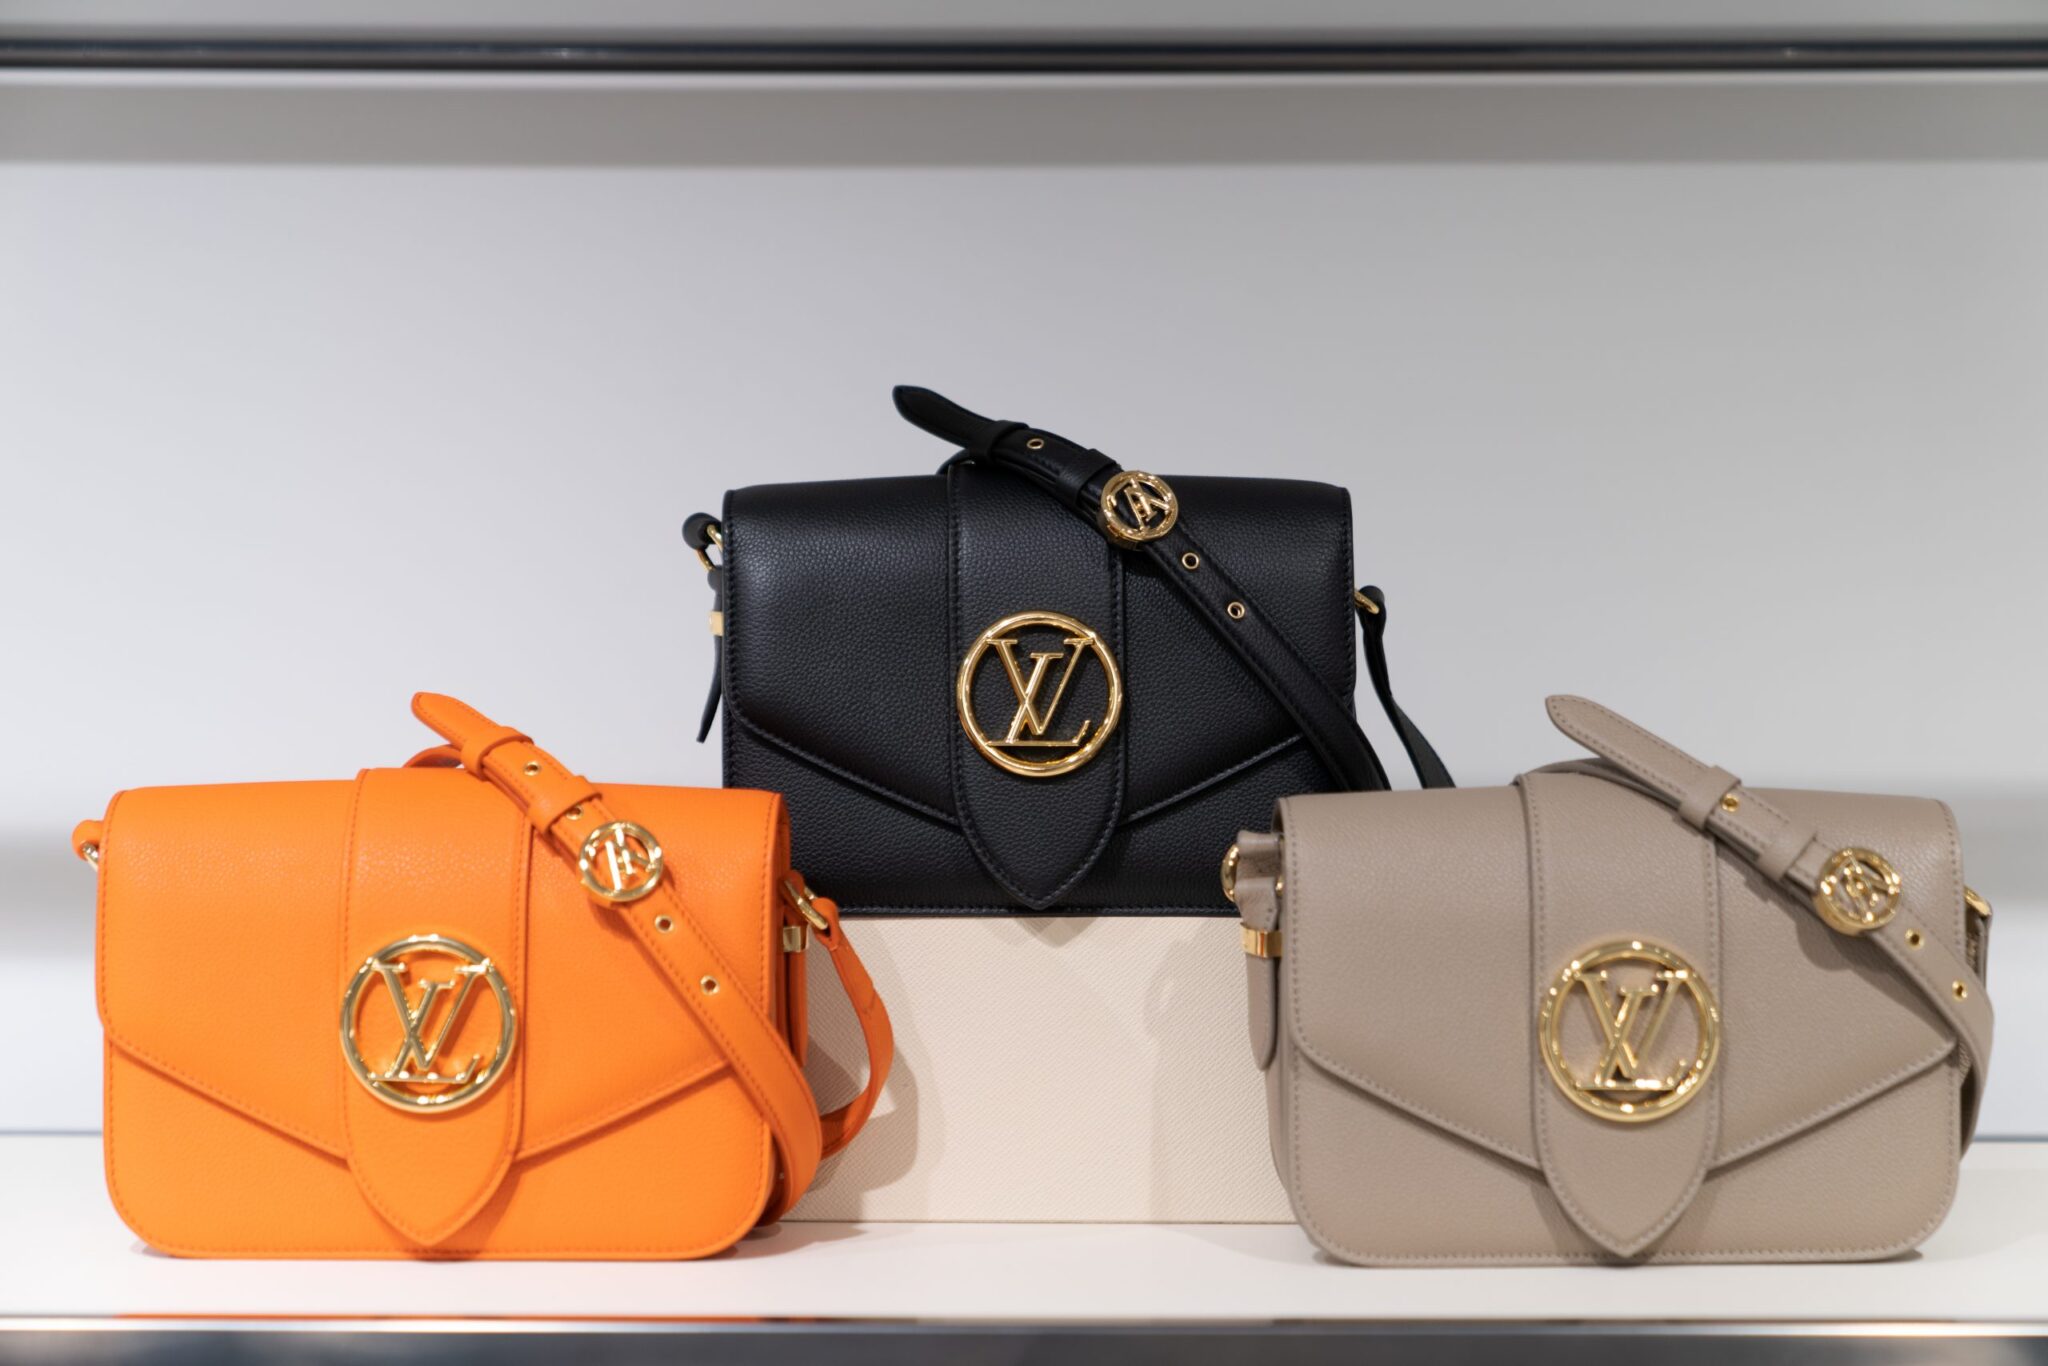 LOUIS VUITTON CRUISE 2021 GAME ON COLLECTION  CHECK OUT THE EYE CANDY FROM LV'S  GAME ON COLLECTION 